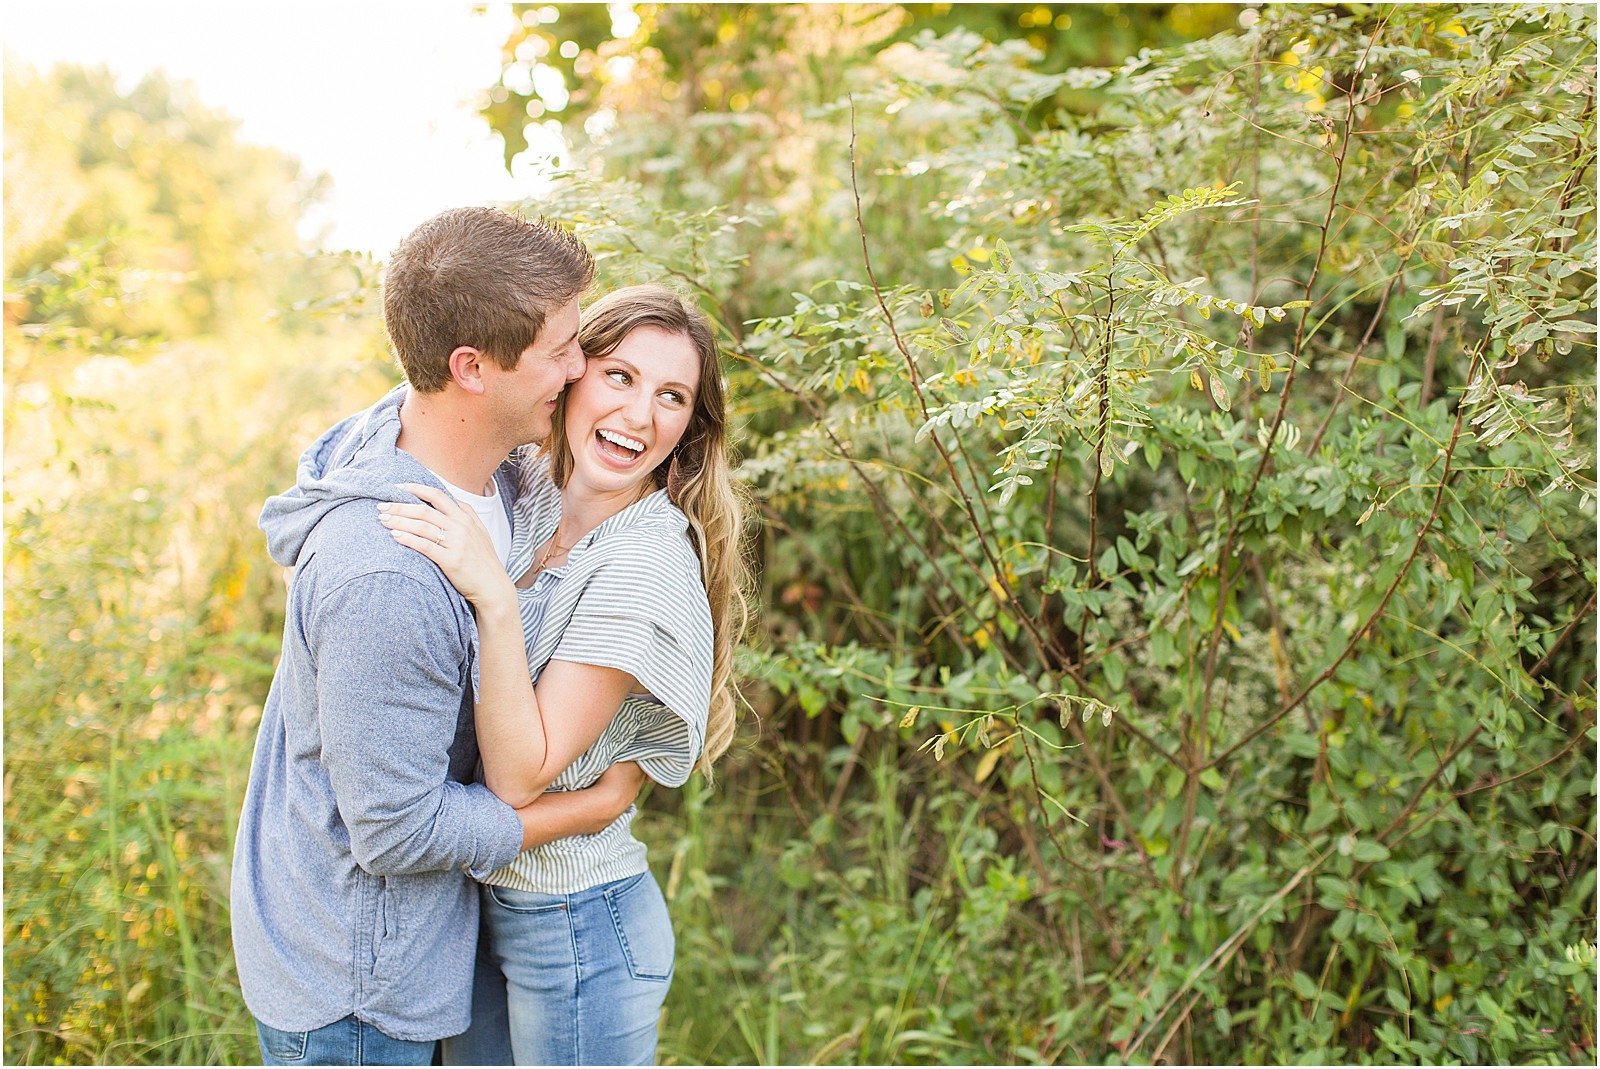 A Jasper Indiana Engagement Session | Tori and Kyle | Bret and Brandie Photography007.jpg